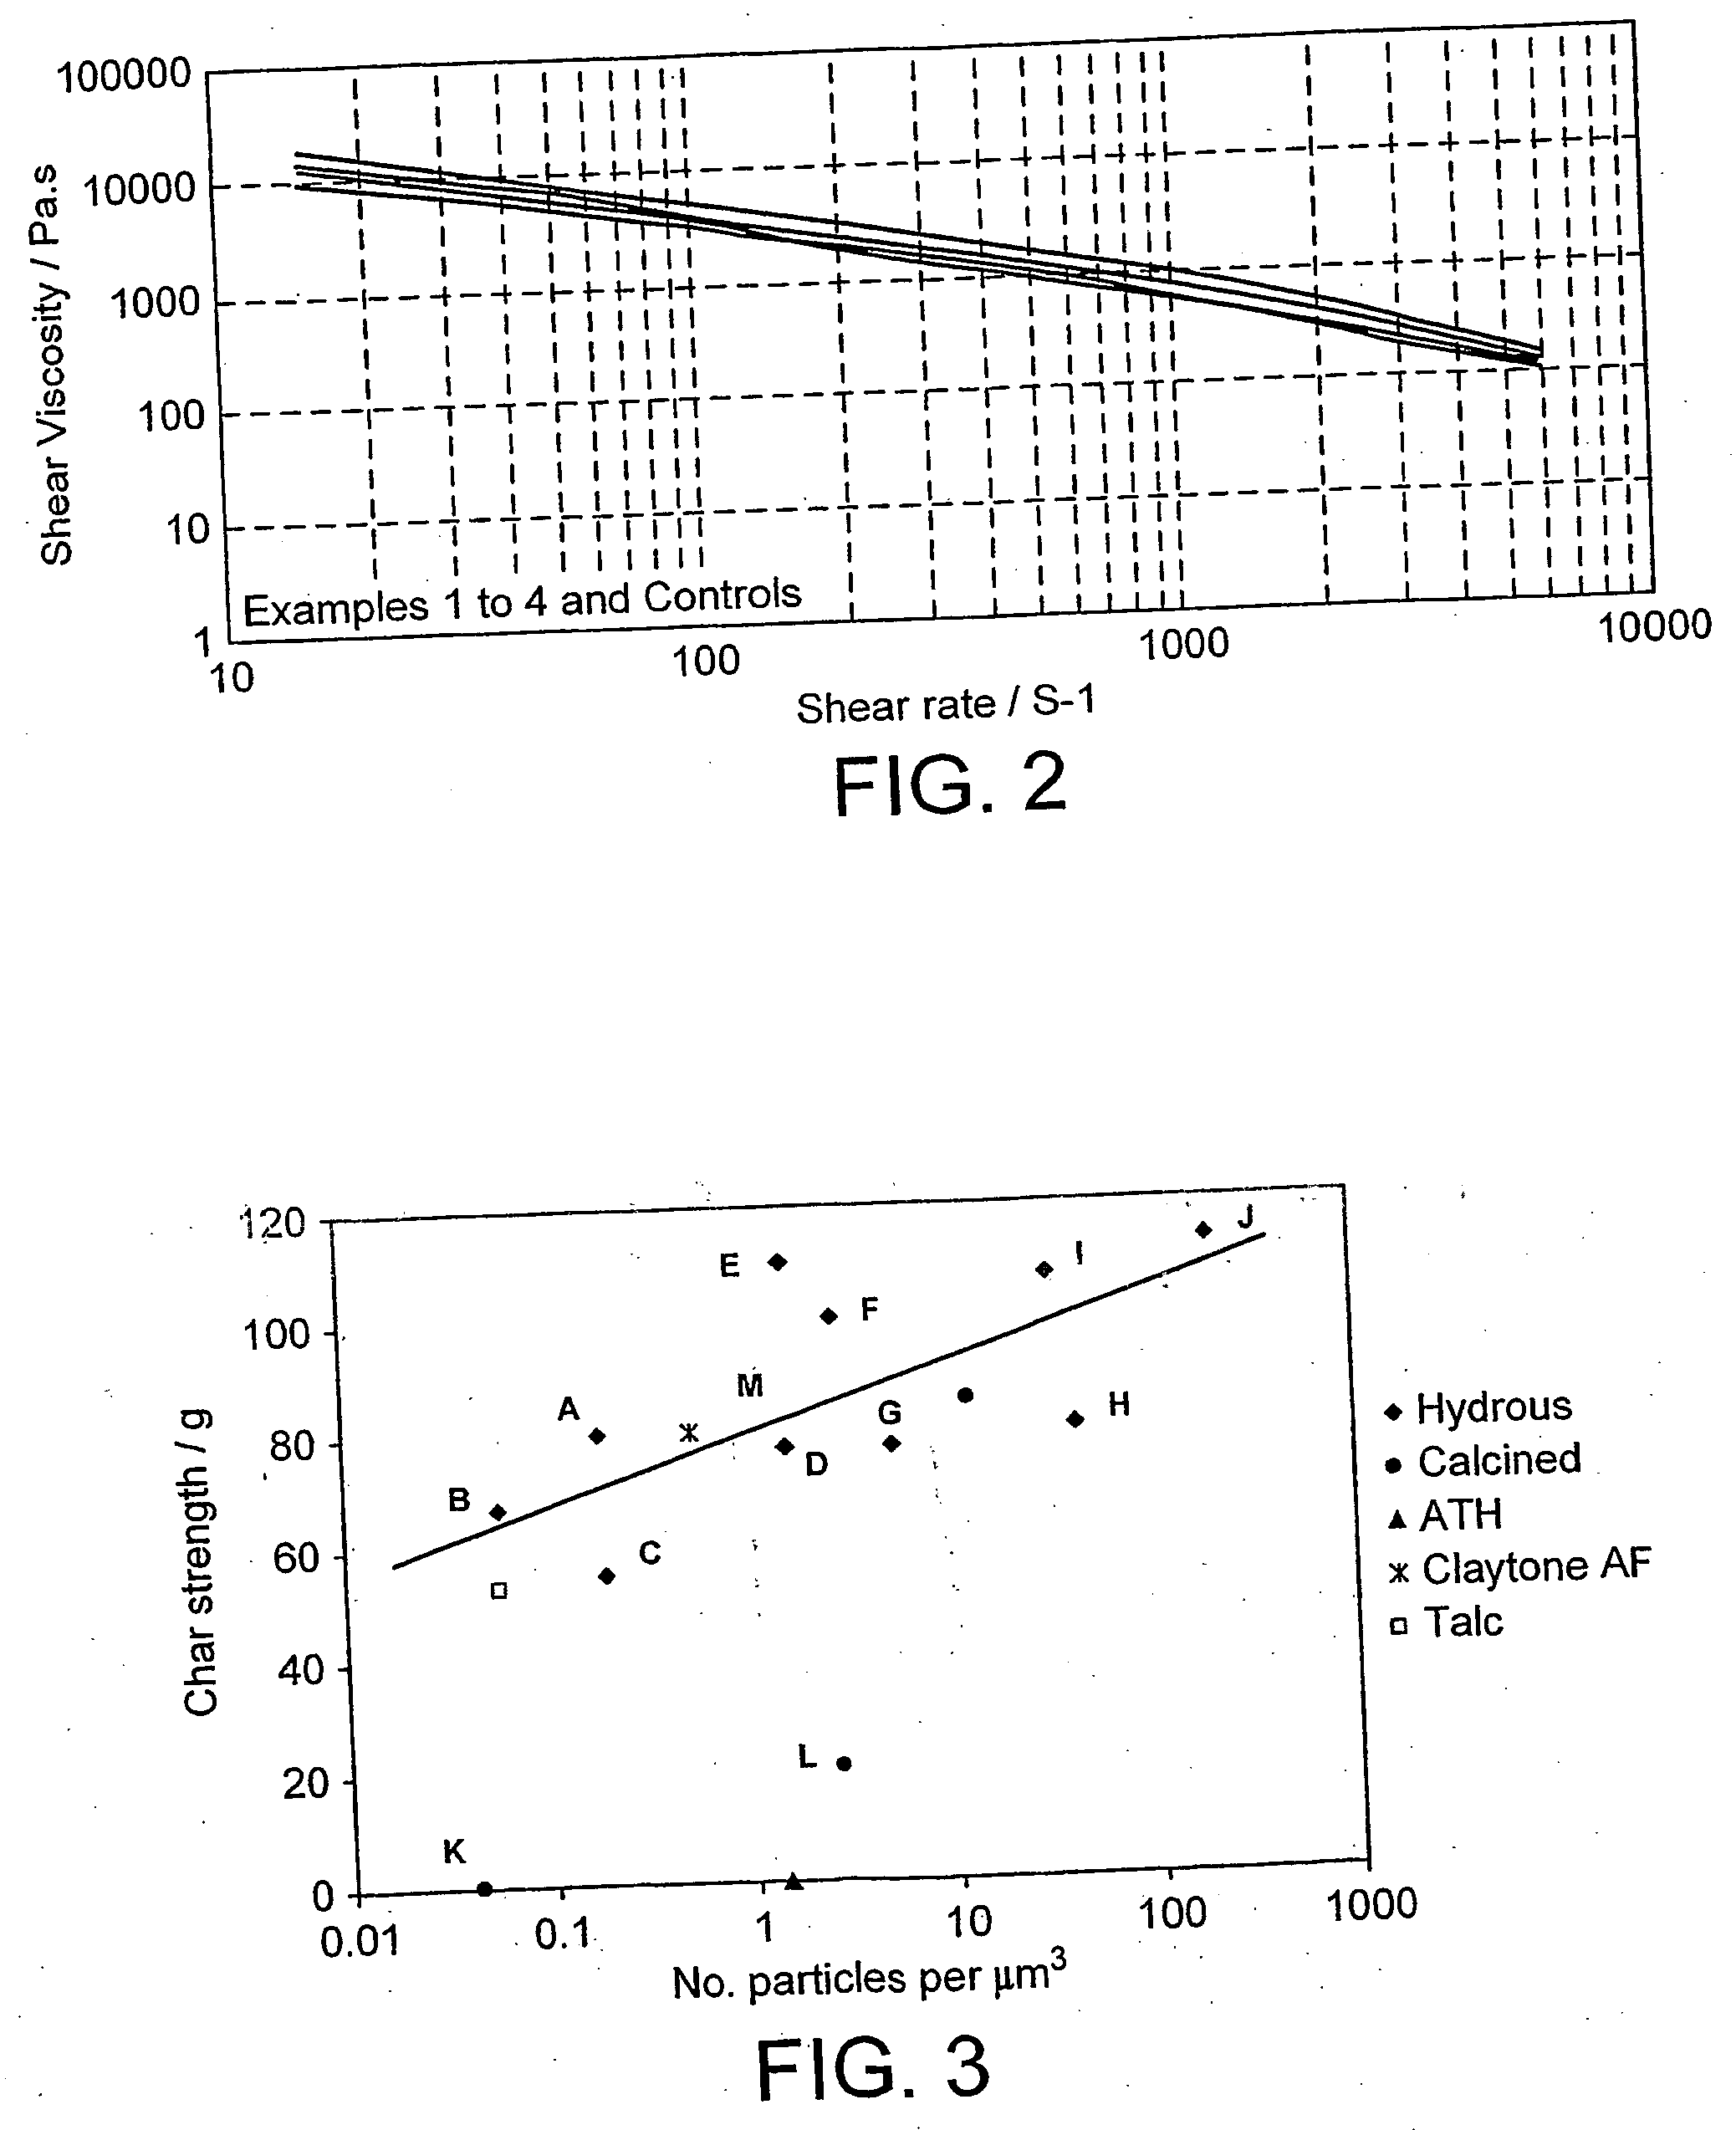 Flame retardant polymer compositions comprising a particulate clay mineral